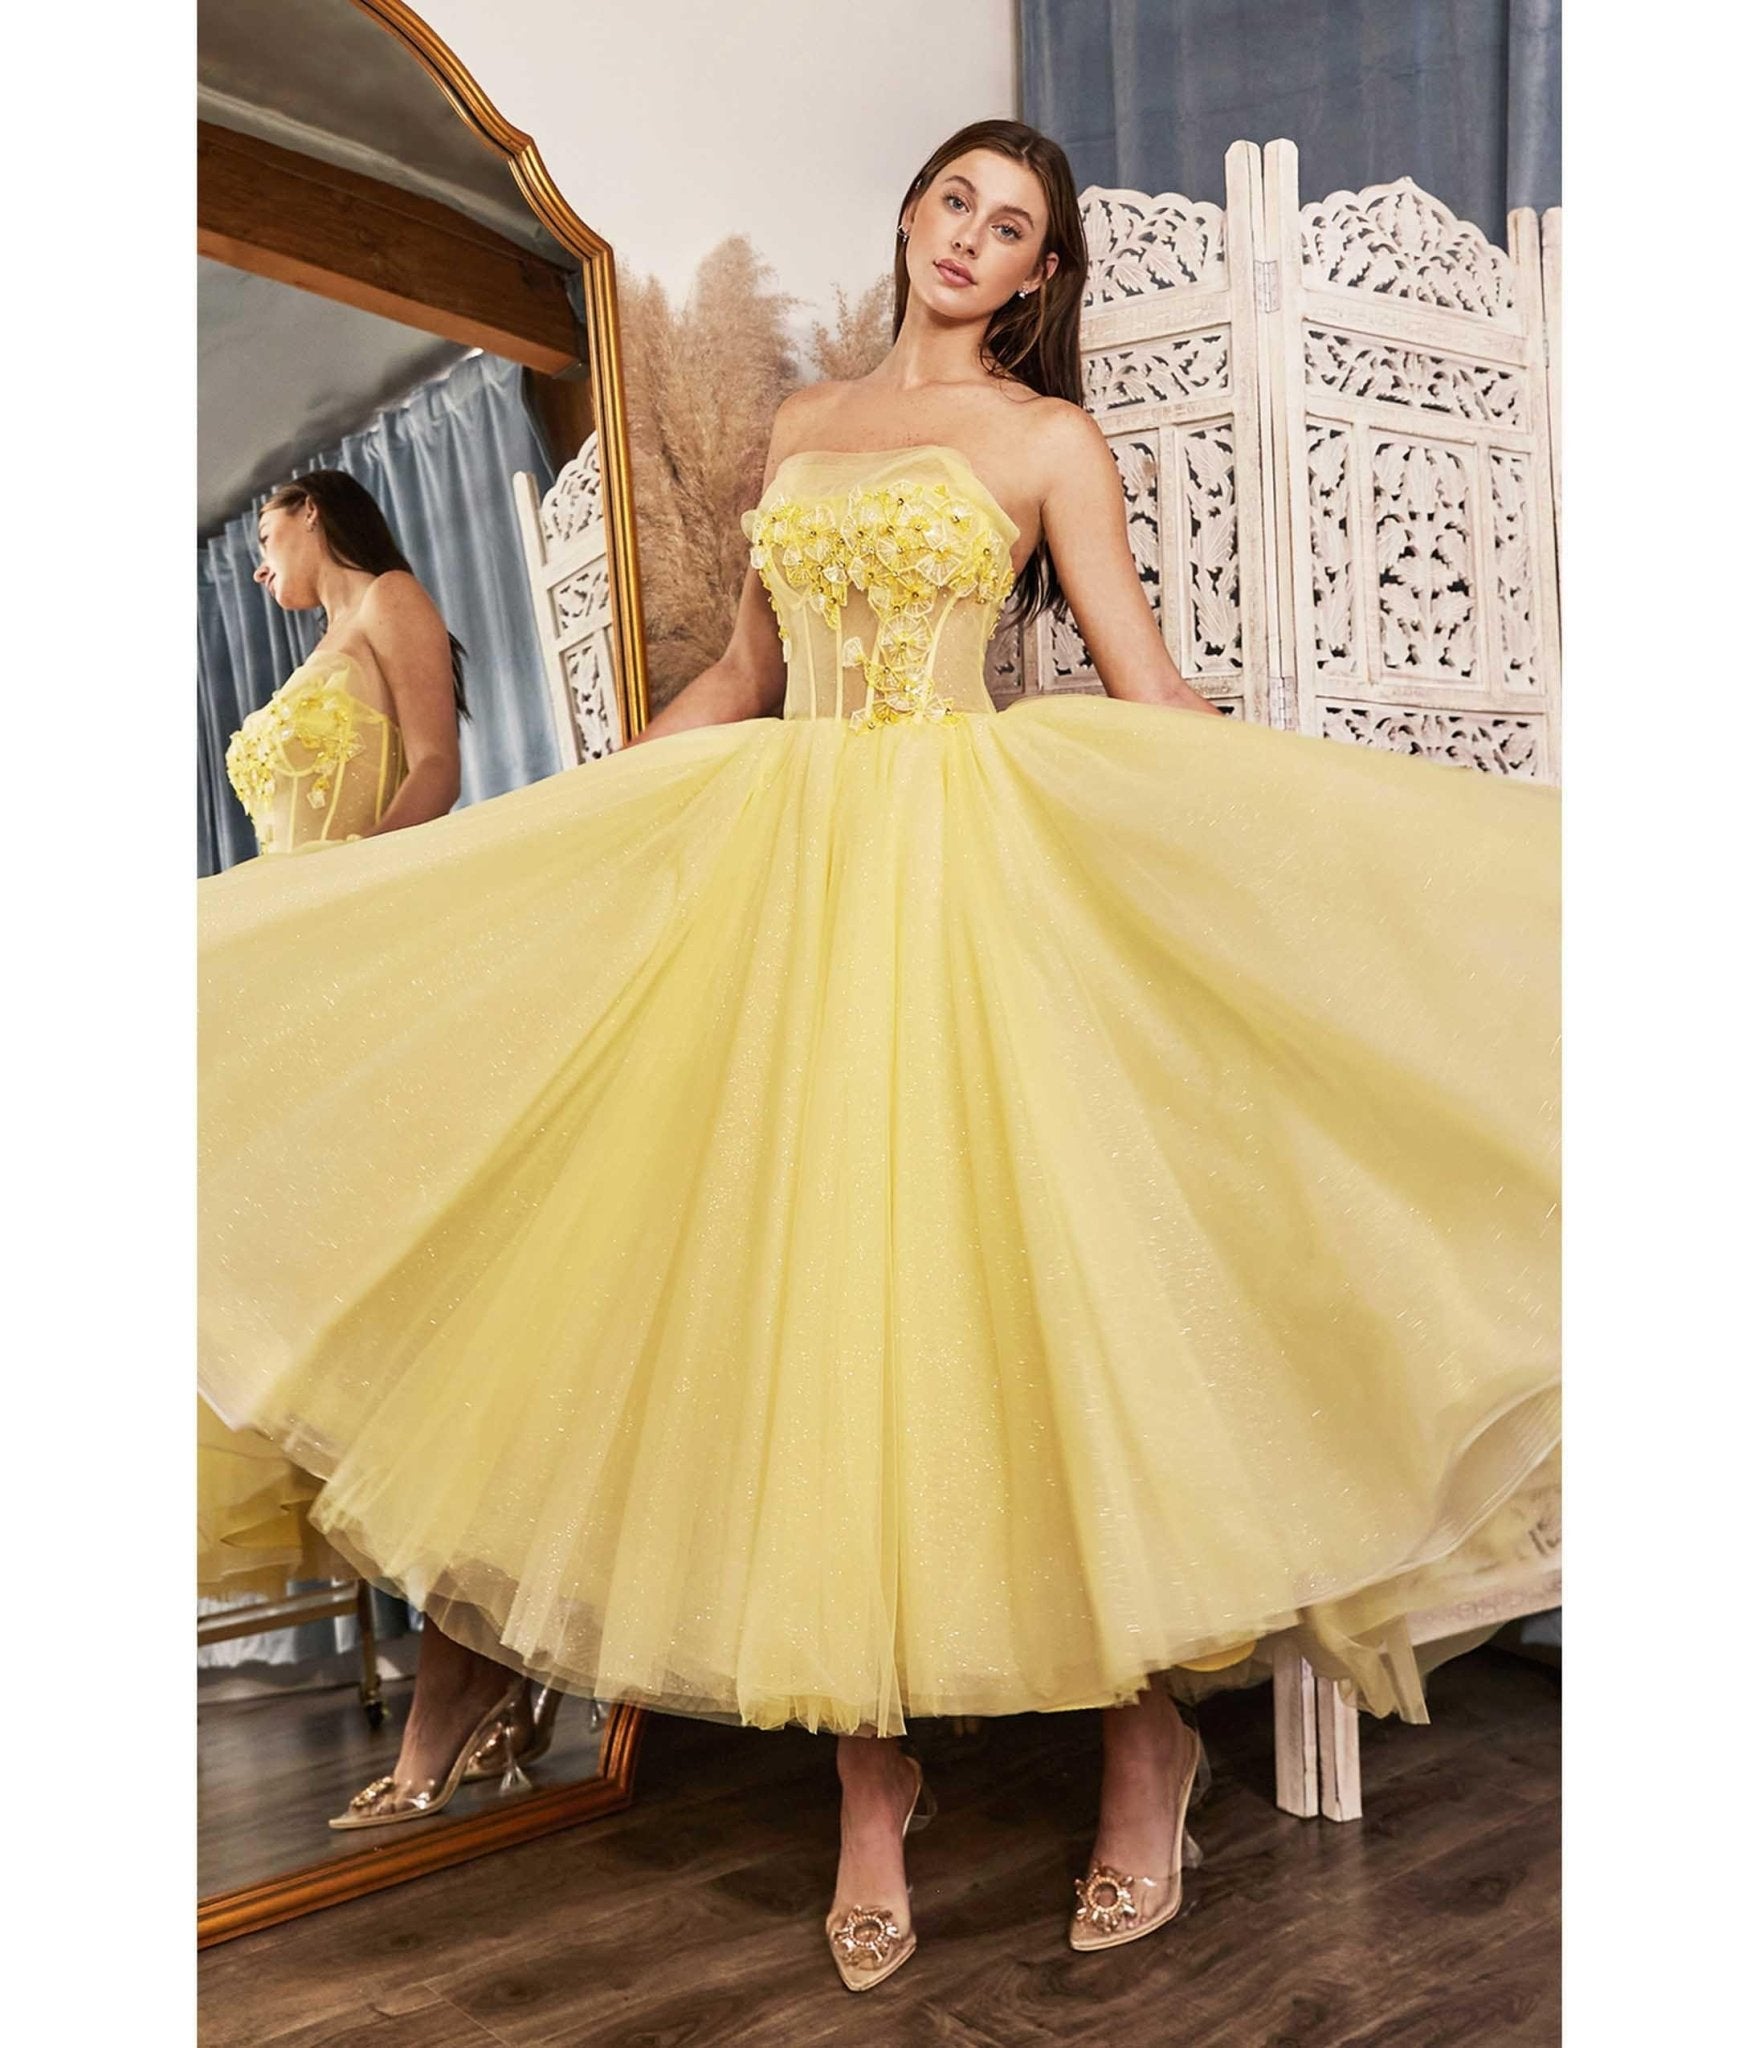 Sunshine Yellow Chiffon Royal Tea Length Bridesmaid Dress - Unique Vintage - Womens, DRESSES, PROM AND SPECIAL OCCASION